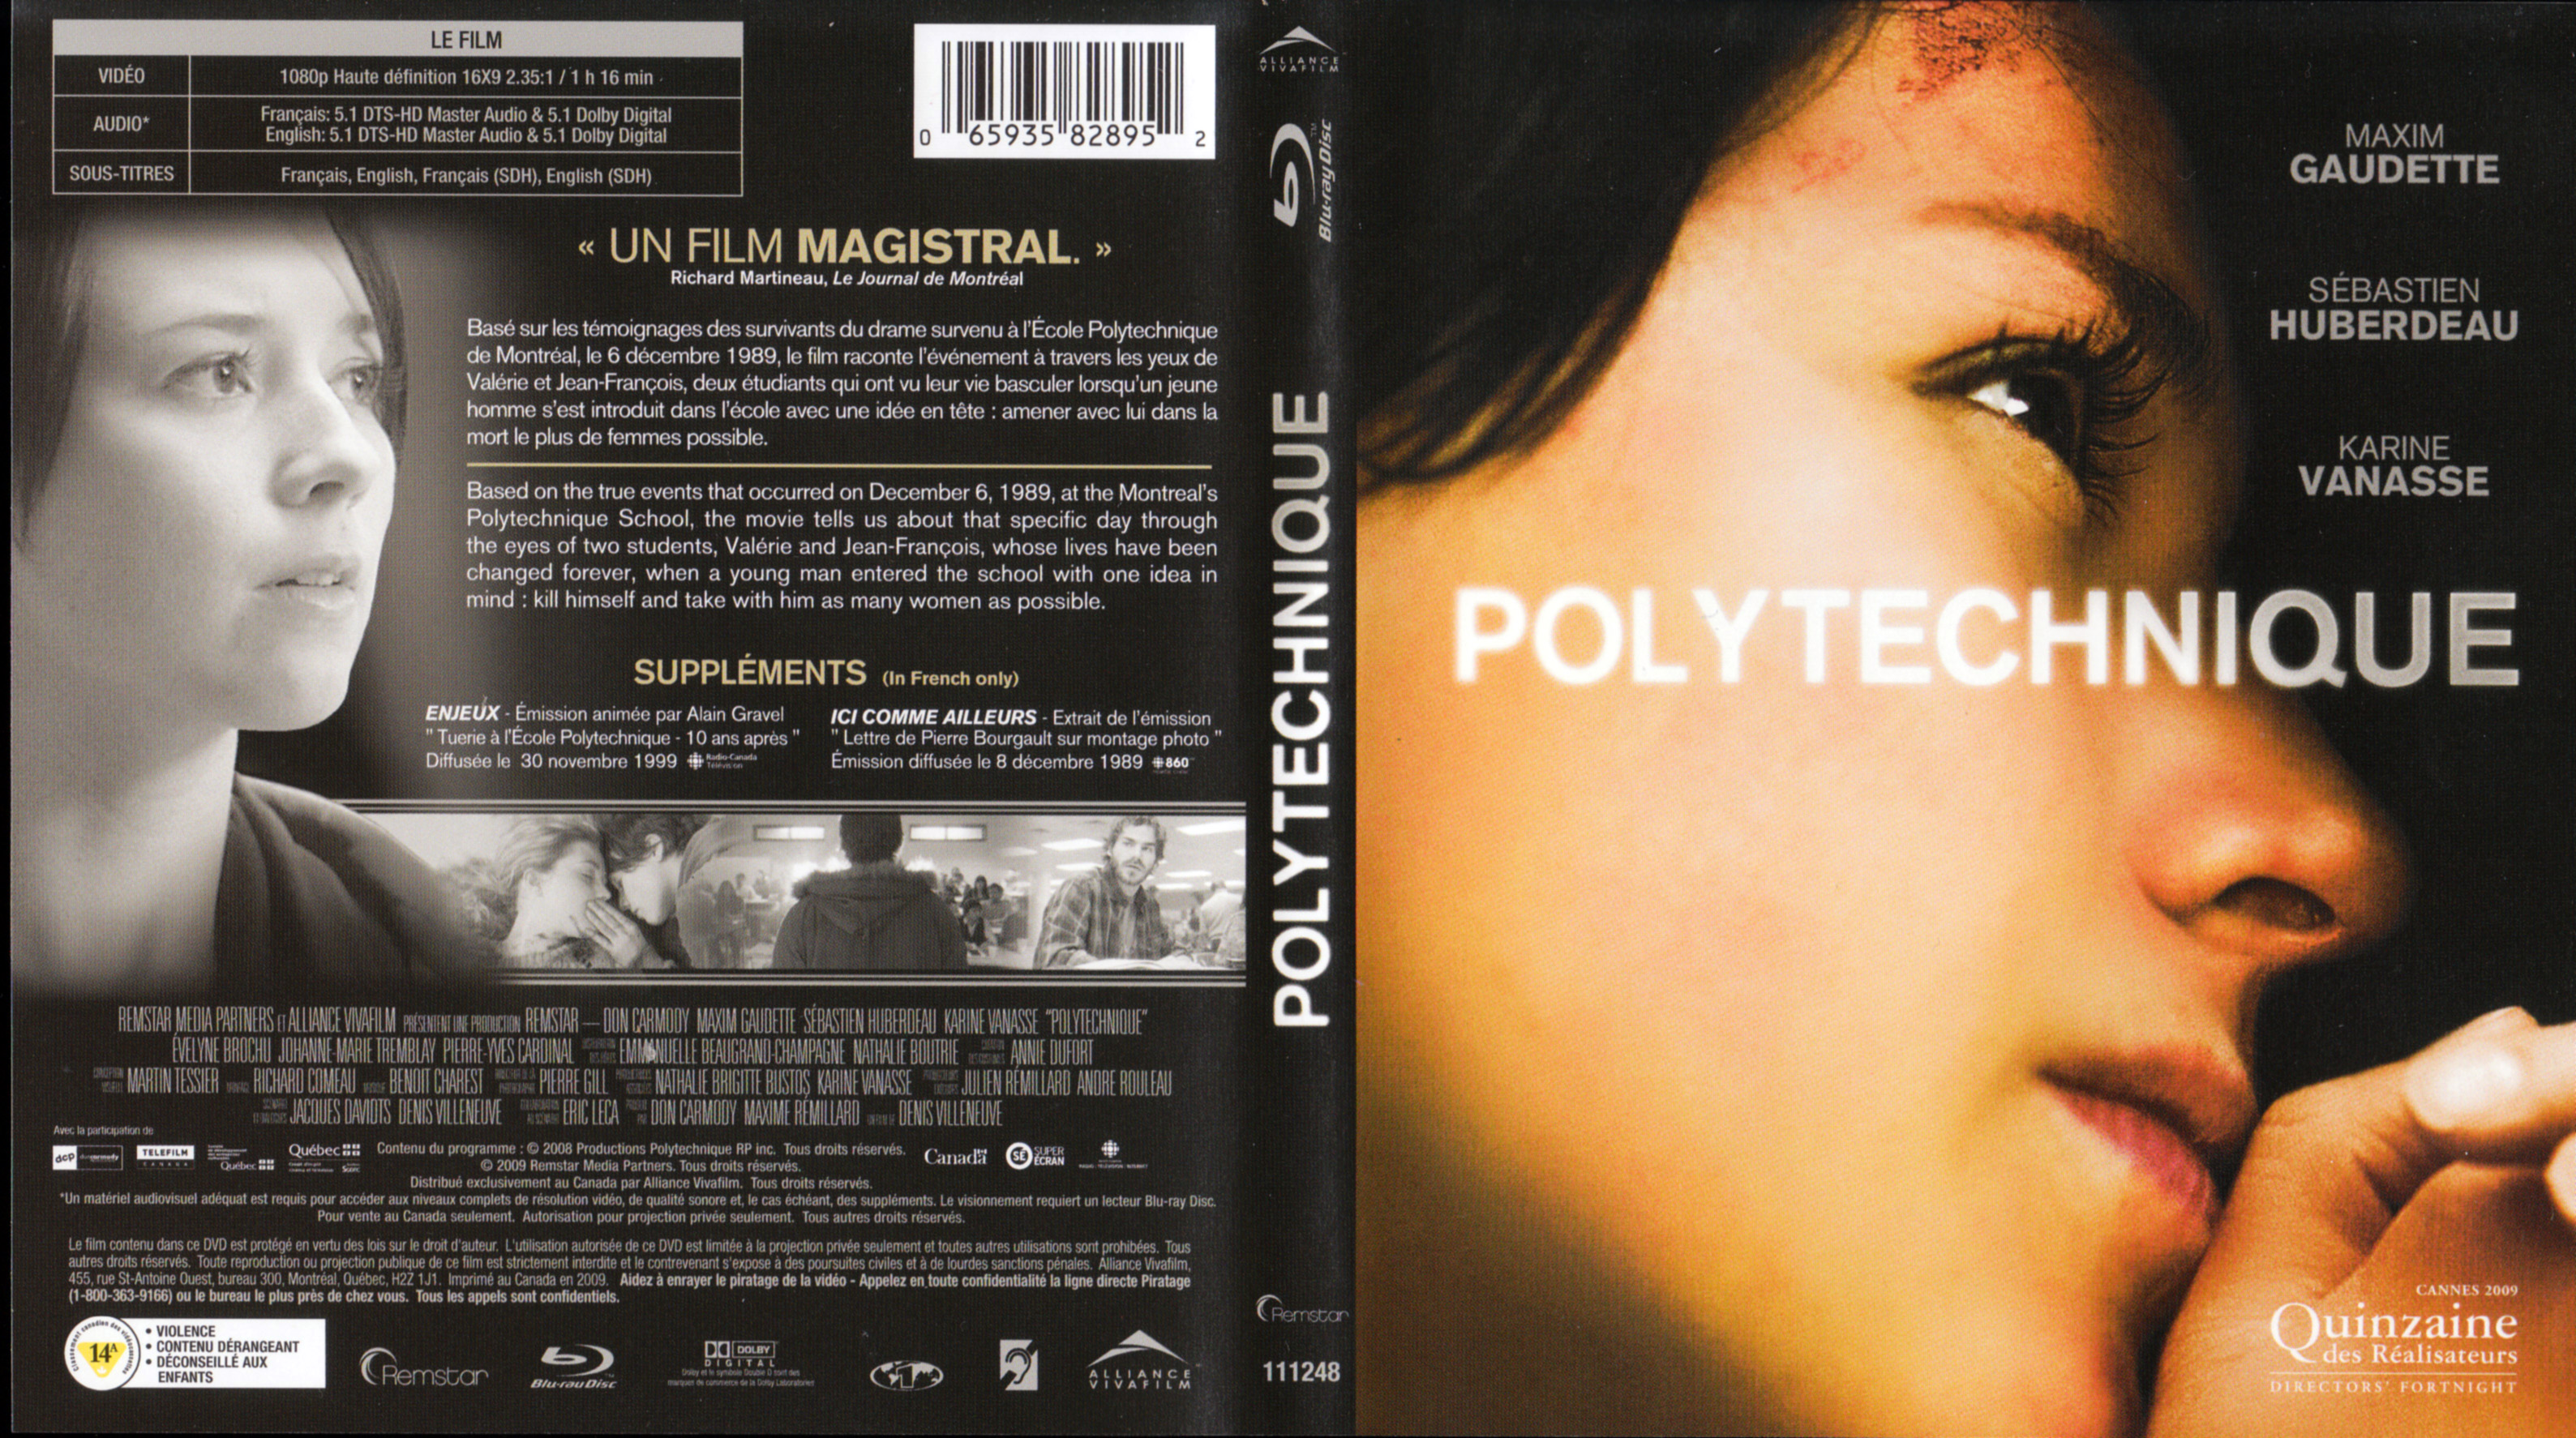 Jaquette DVD Polytechnique (BLU-RAY) (Canadienne)